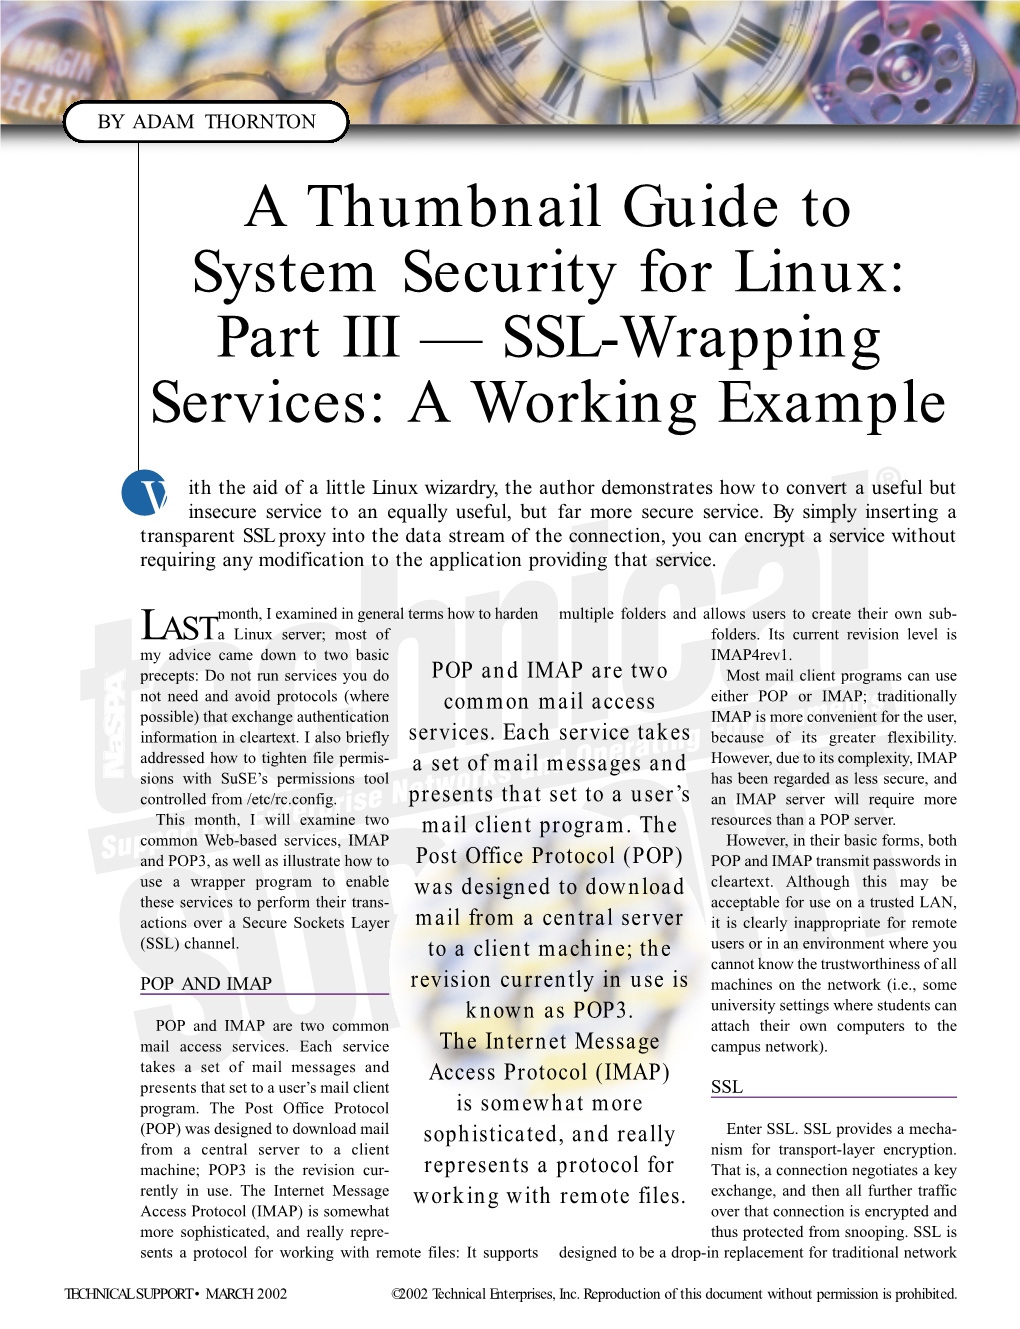 A Thumbnail Guide to System Security for Linux: Part III — SSL-Wrapping Services: a Working Example